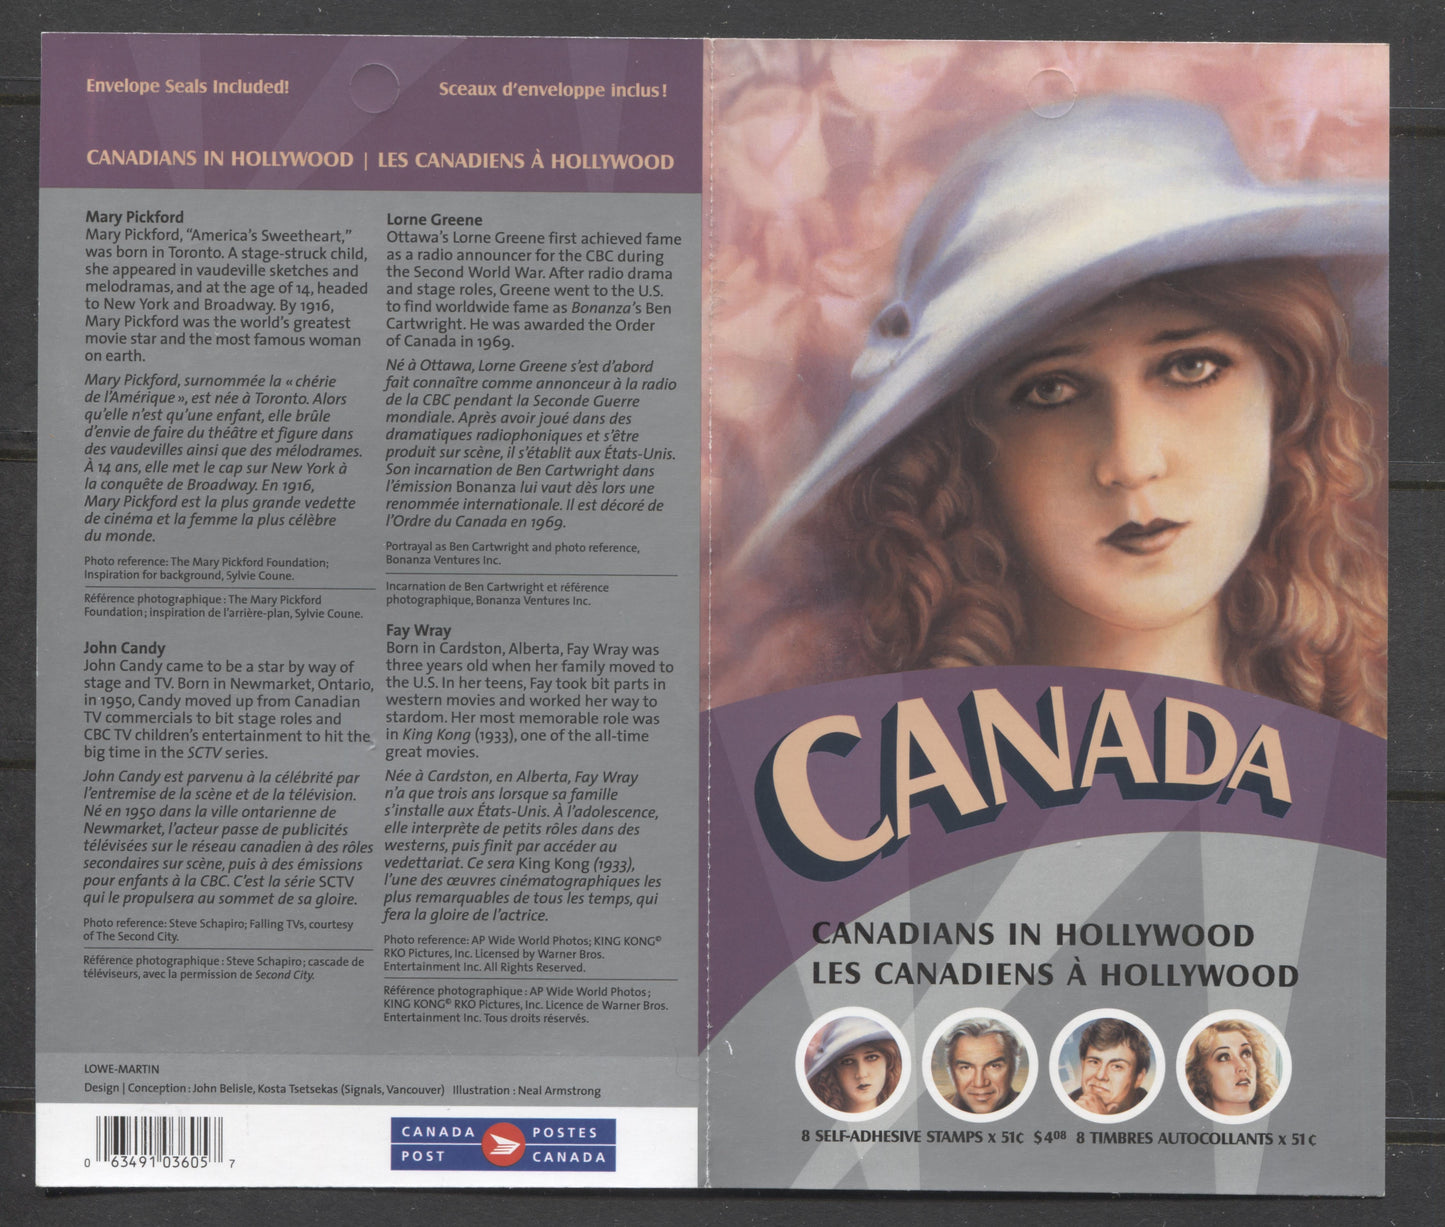 Canada #BK329 2006 Canadians in Hollywood Issue, Complete $4.08 Booklet, Tullis Russell Coatings Paper, Dead Paper, 4 mm GT-4 Tagging